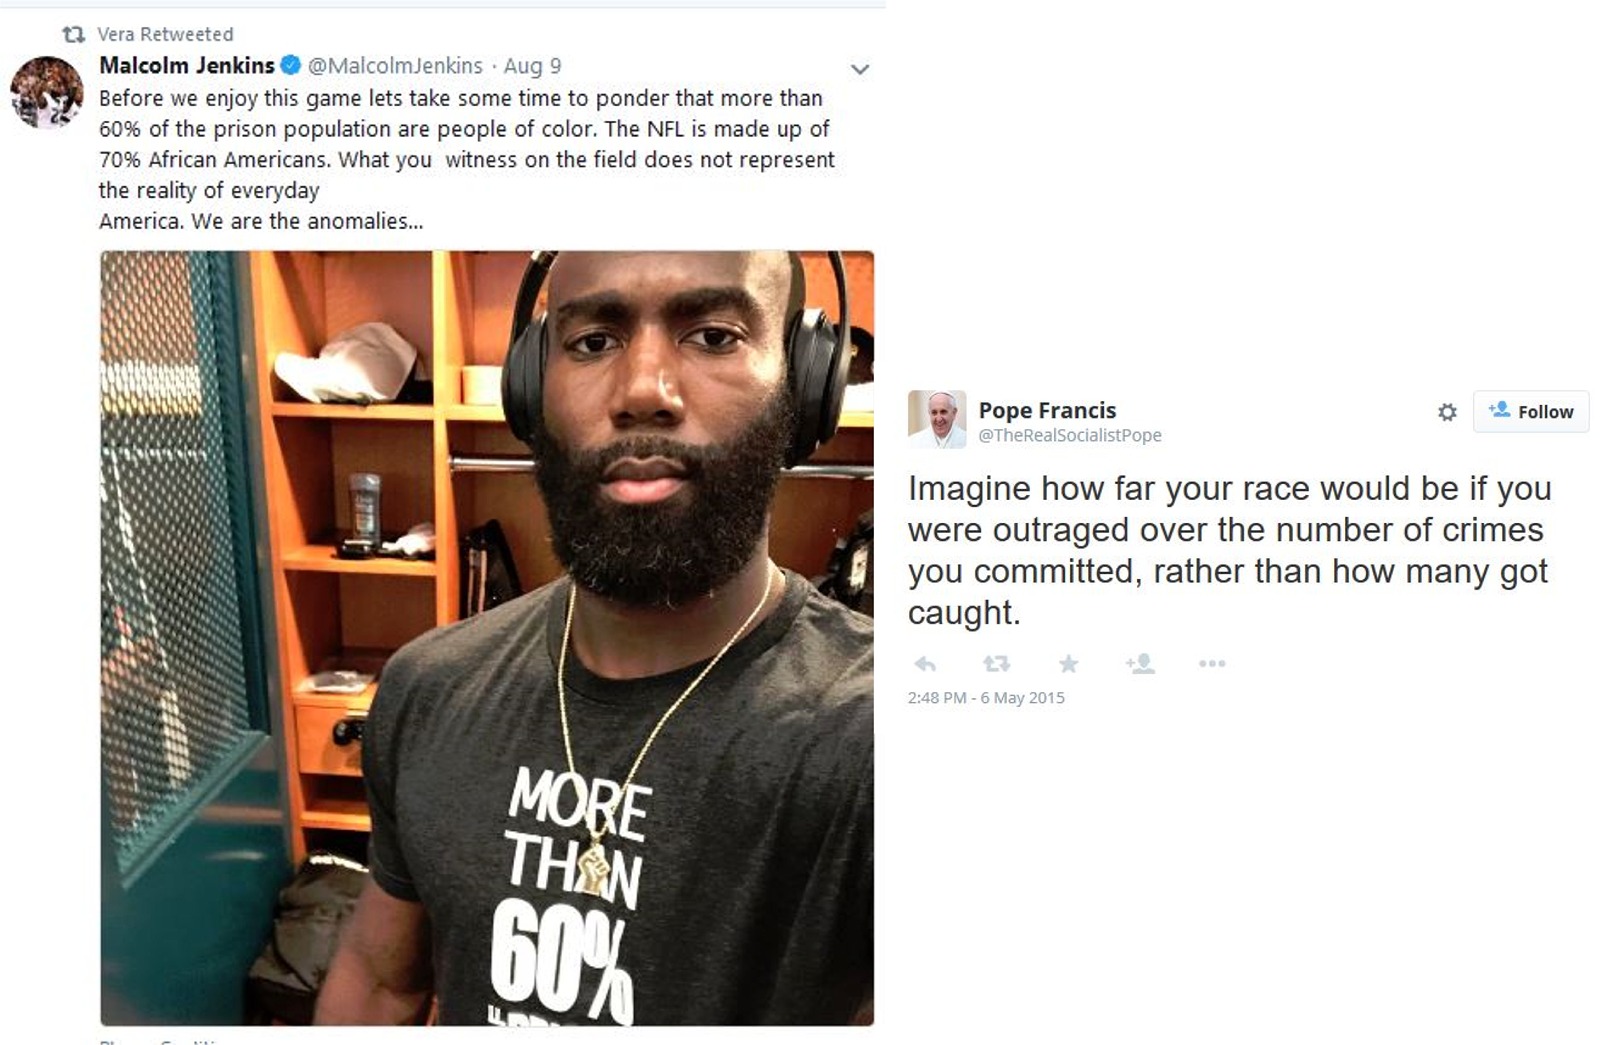 beard - Vera Retweeted Malcolm Jenkins Jenkins Aug 9 Before we enjoy this game lets take some time to ponder that more than 60% of the prison population are people of color. The Nfl is made up of 70% African Americans. What you witness on the field does n